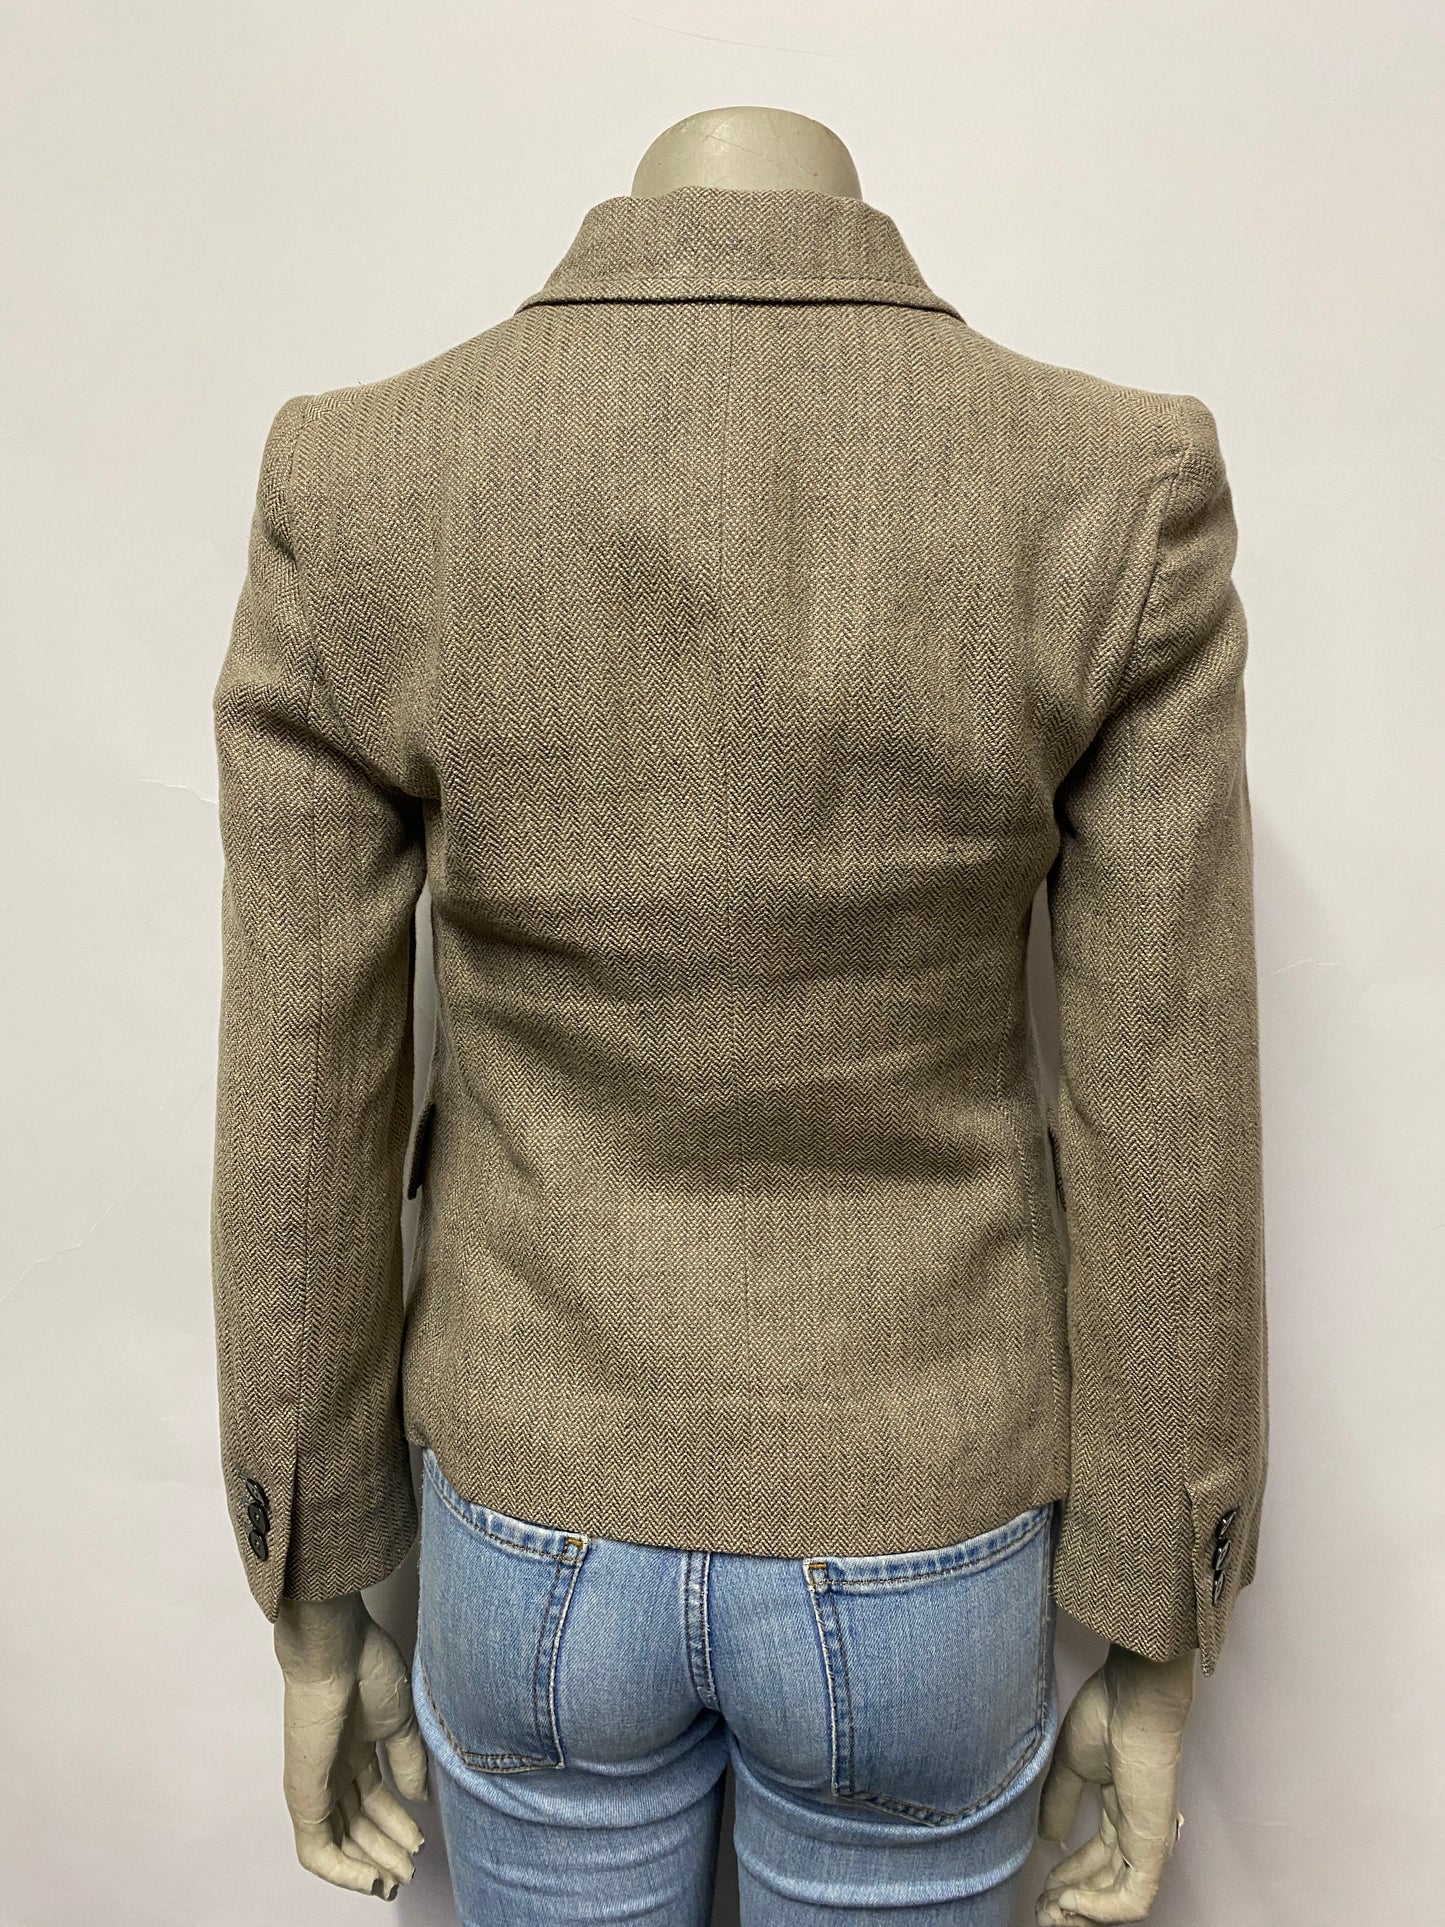 Marc by Marc Jacobs Taupe Linen Blend Blazer Extra Small